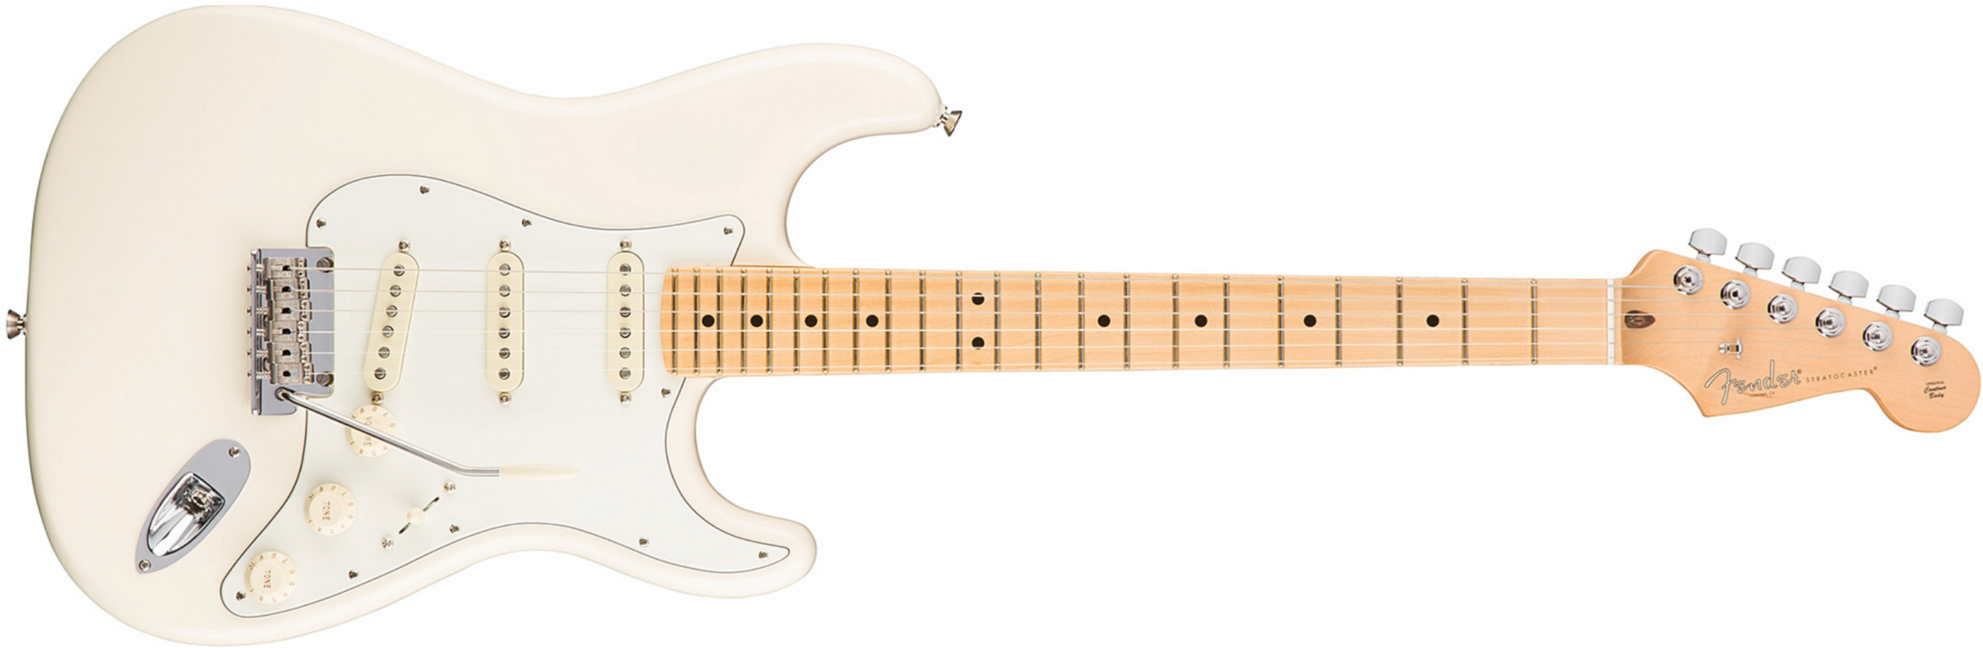 Fender Strat American Professional 2017 3s Usa Mn - Olympic White - Guitare Électrique Forme Str - Main picture